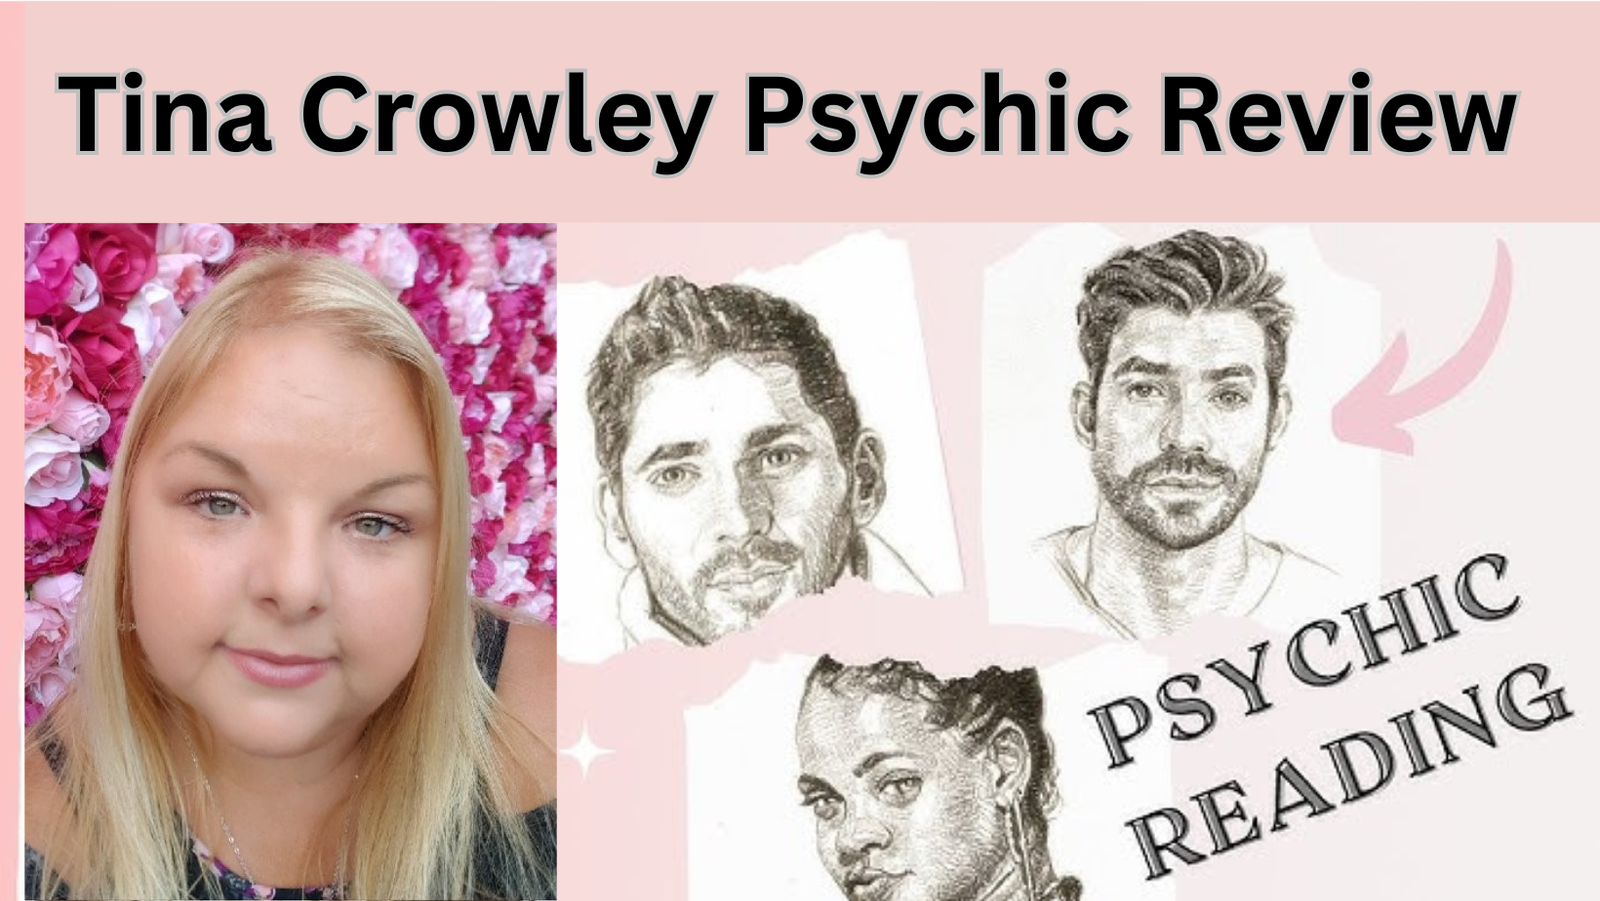 Tina Crowley Psychic Review